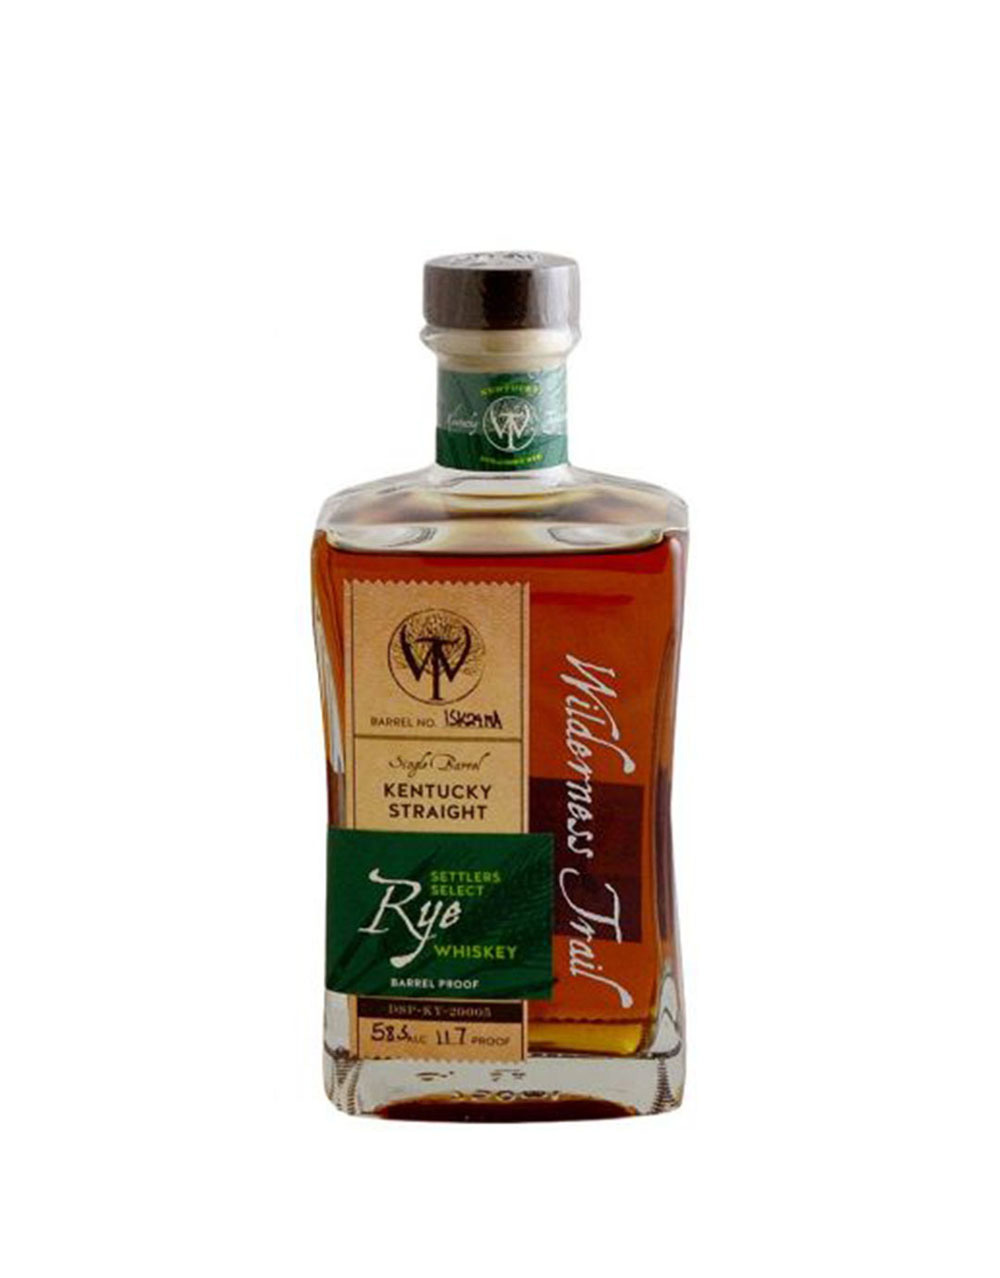 Redemption 10 Year Old Barrel Proof Rye Whiskey